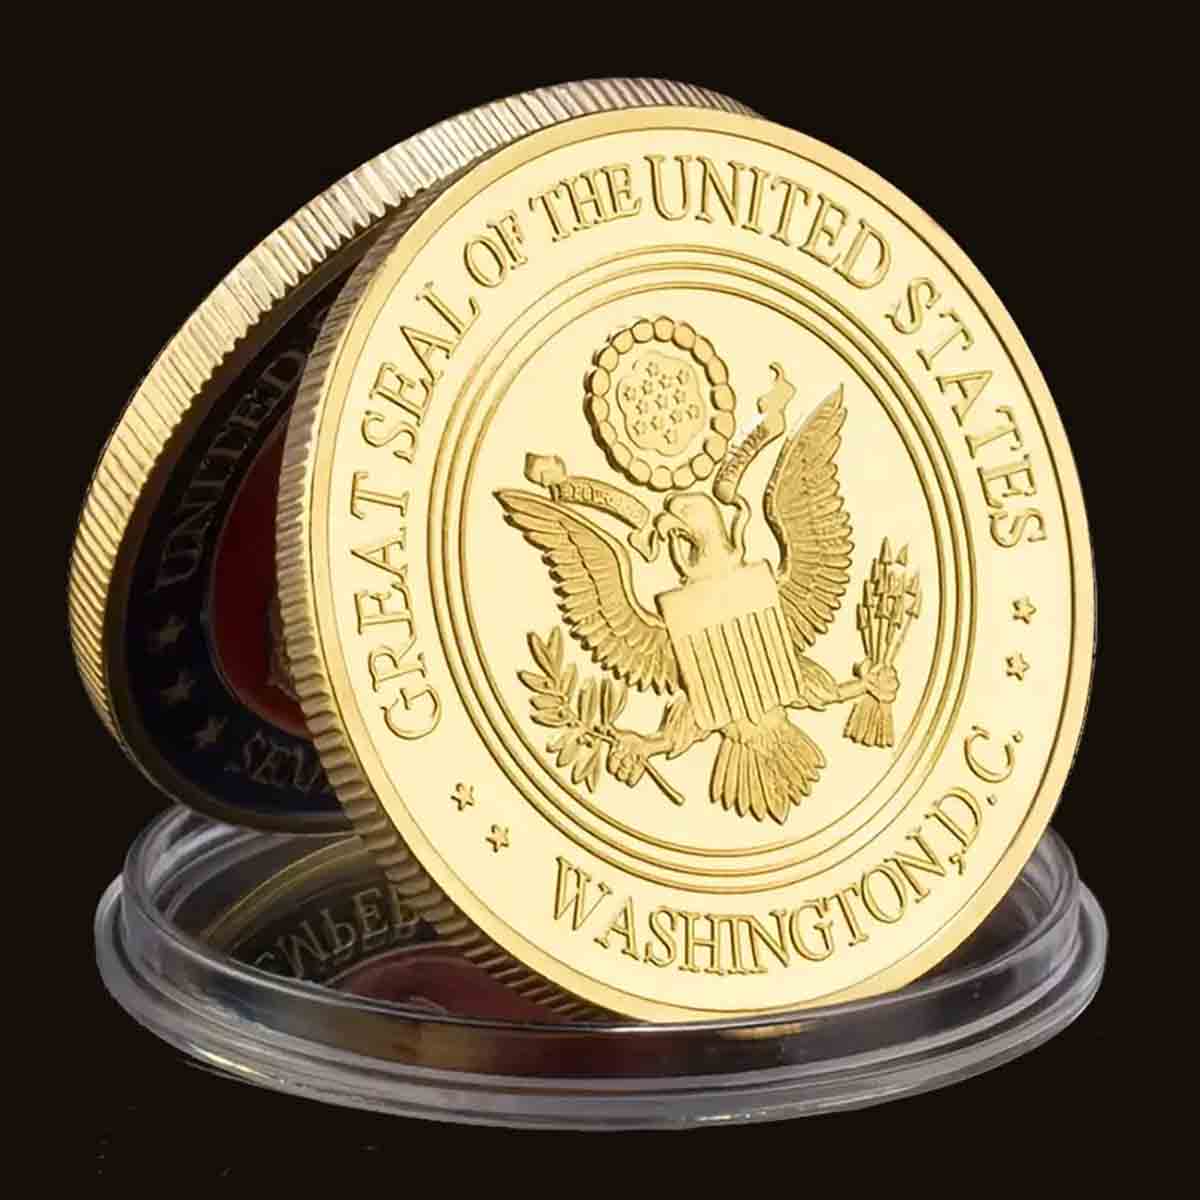 USA Marine Corps Semper Fidelis Commemorative Coin. High-quality Color plating for a stunning shine and durability. Perfect as a gift for Marine Corps active duty and veterans. Comes in a protective plastic case to preserve its beauty and value. Patriot Gear USA